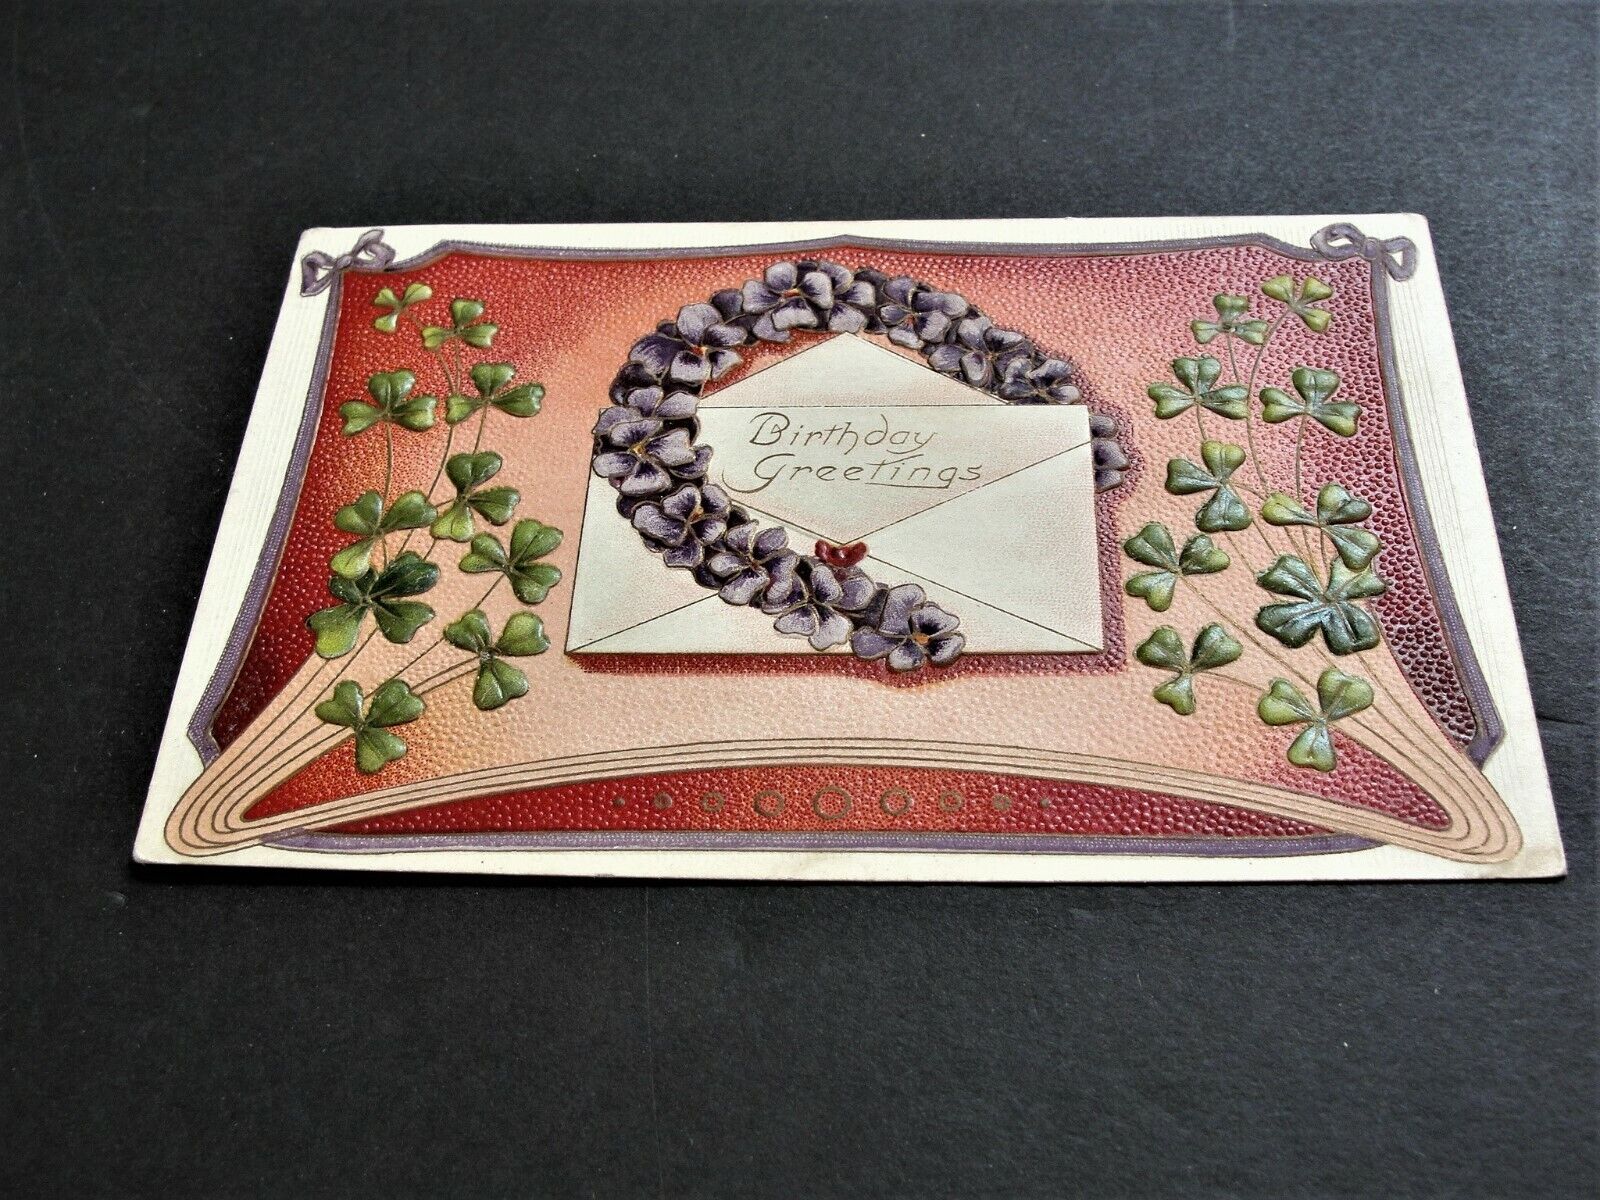 1909 Birthday Greetings - Ben Franklin One Cent-Embossed Postcard. RARE.